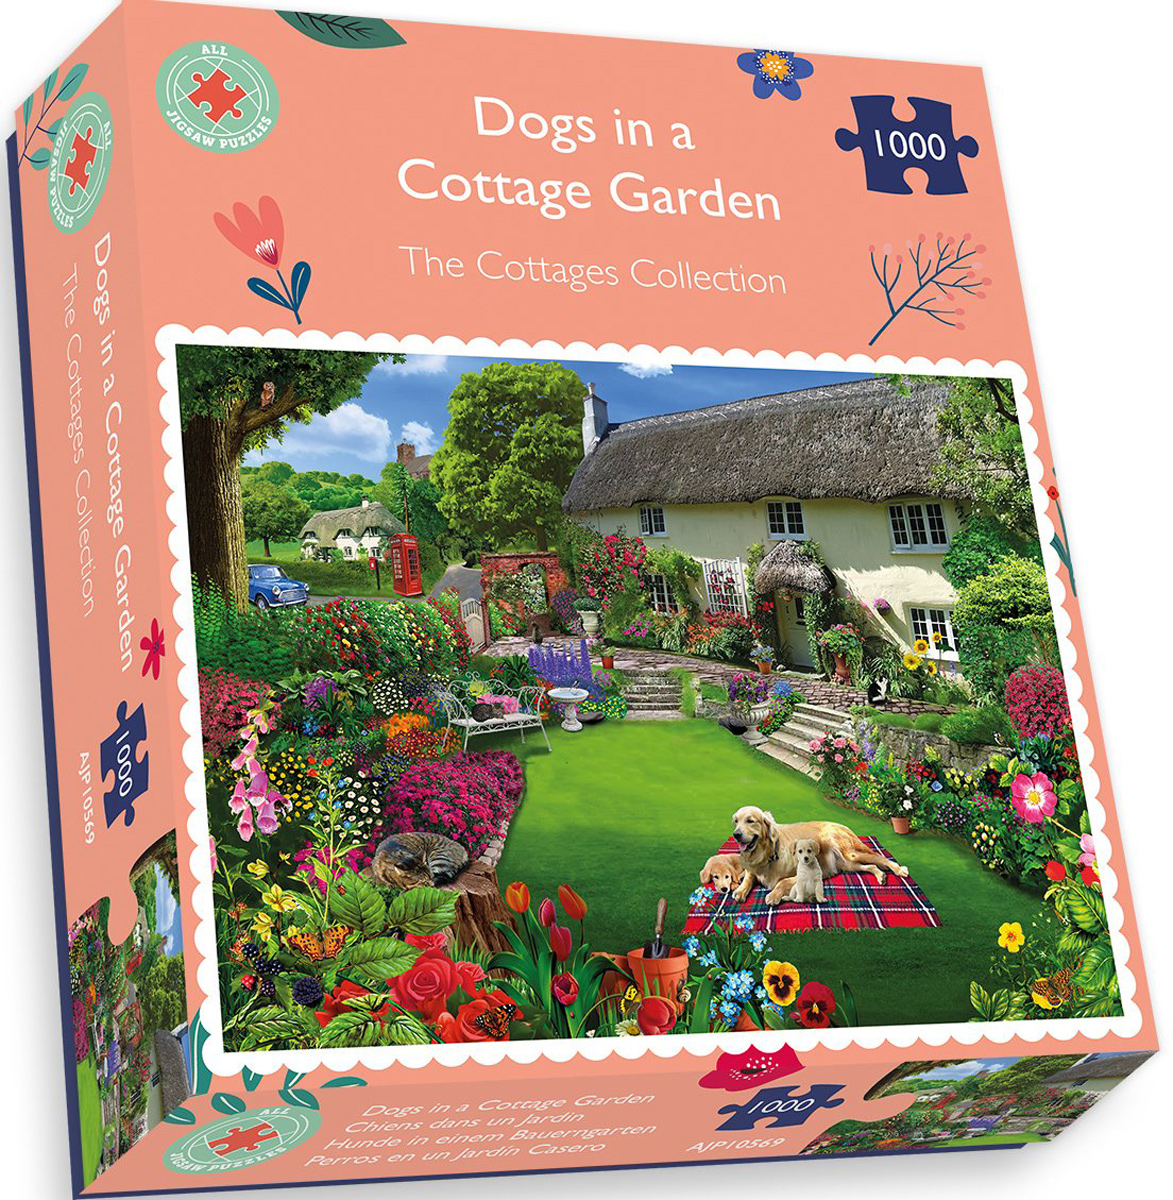 Dogs in a Cottage Garden